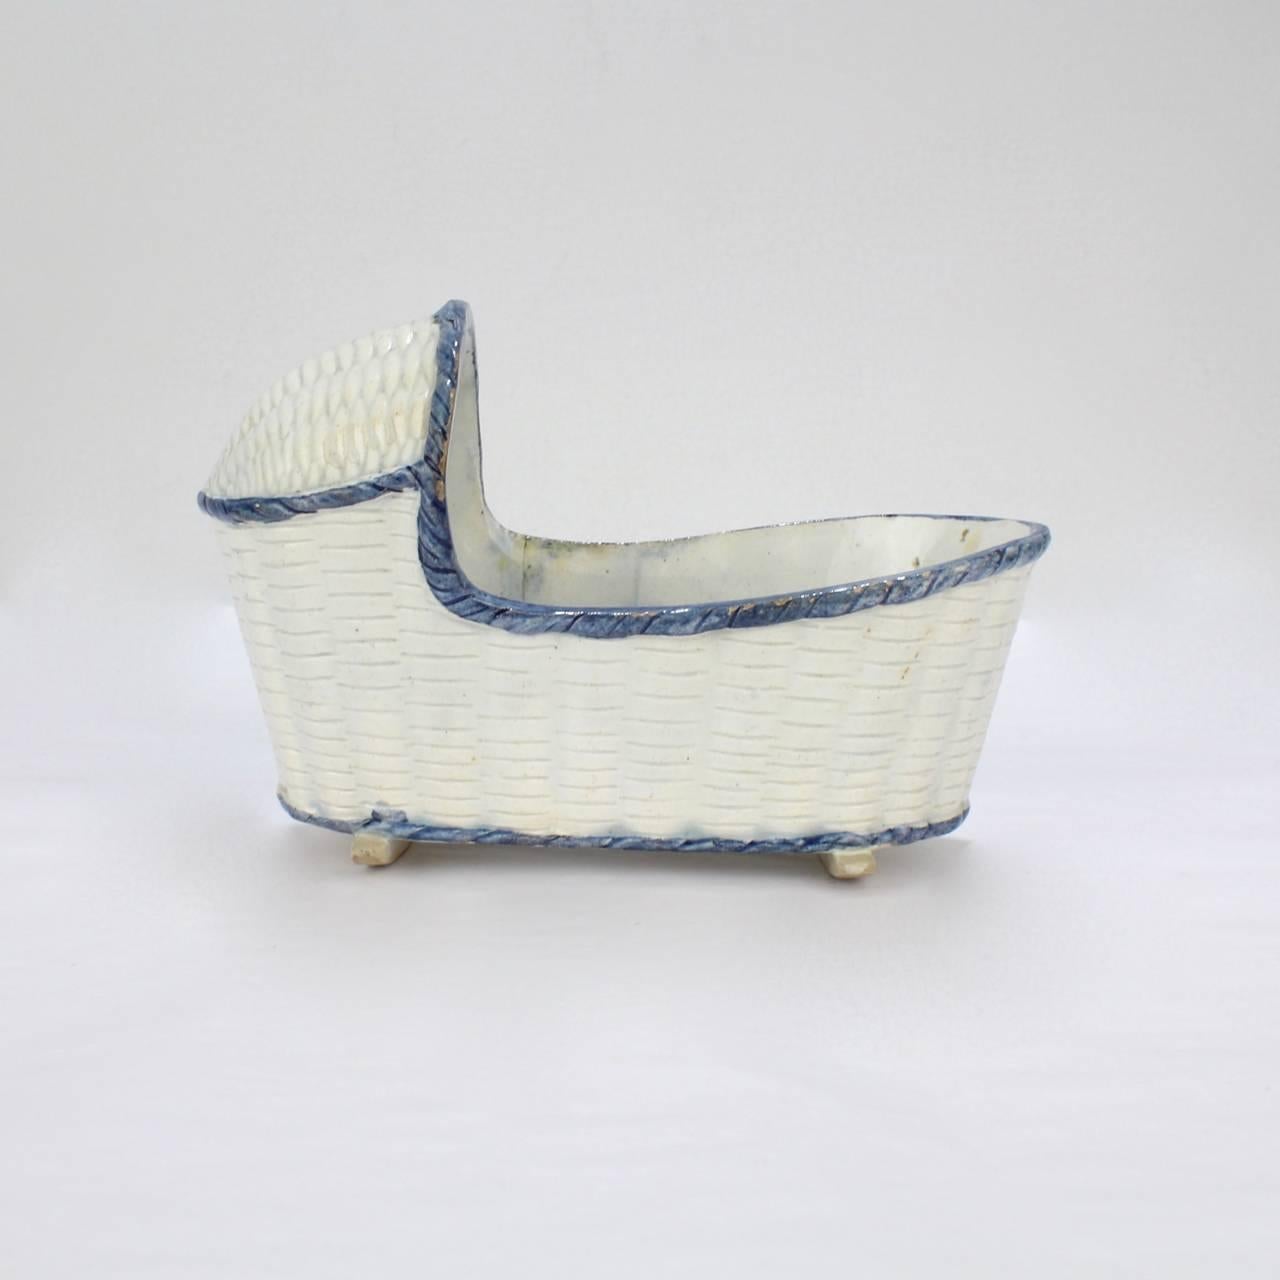 18th Century Large Antique English Blue & White Staffordshire or Pearlware Cradle Figurine For Sale